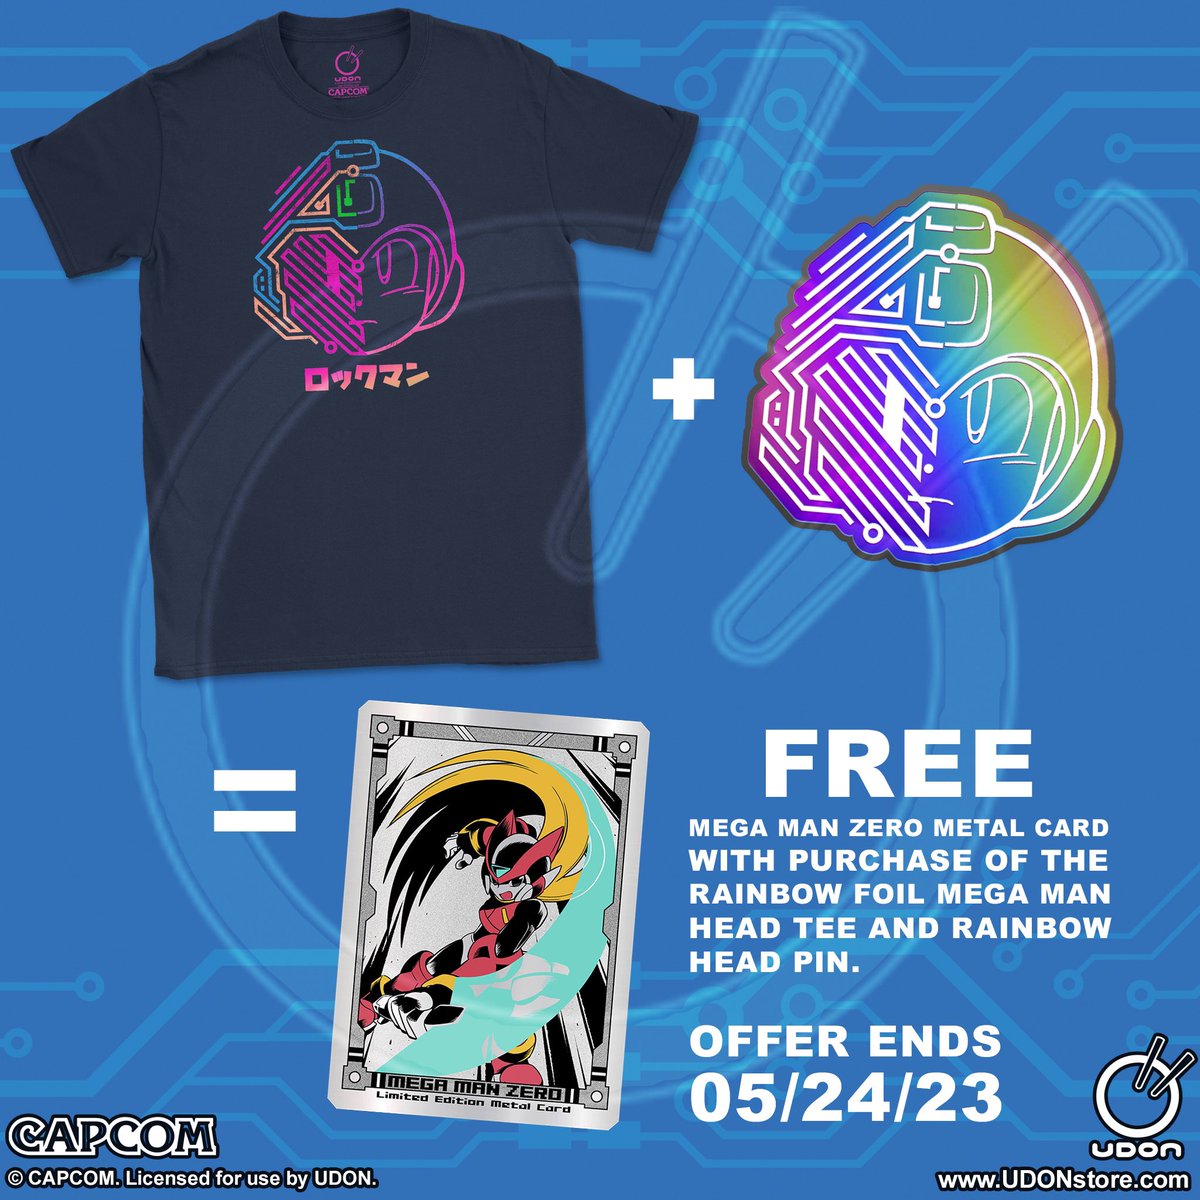 UdonStore News! @UdonEnt We've got a 2 week Mega May promotion starting tomorrow, Wednesday 5/10! We've got a couple of new pins going up, plus a new @ariga_megamix #MegaMan Zero Metal Card available when you purchase the new tee + the new head pin! store.udonentertainment.com/collections/me…